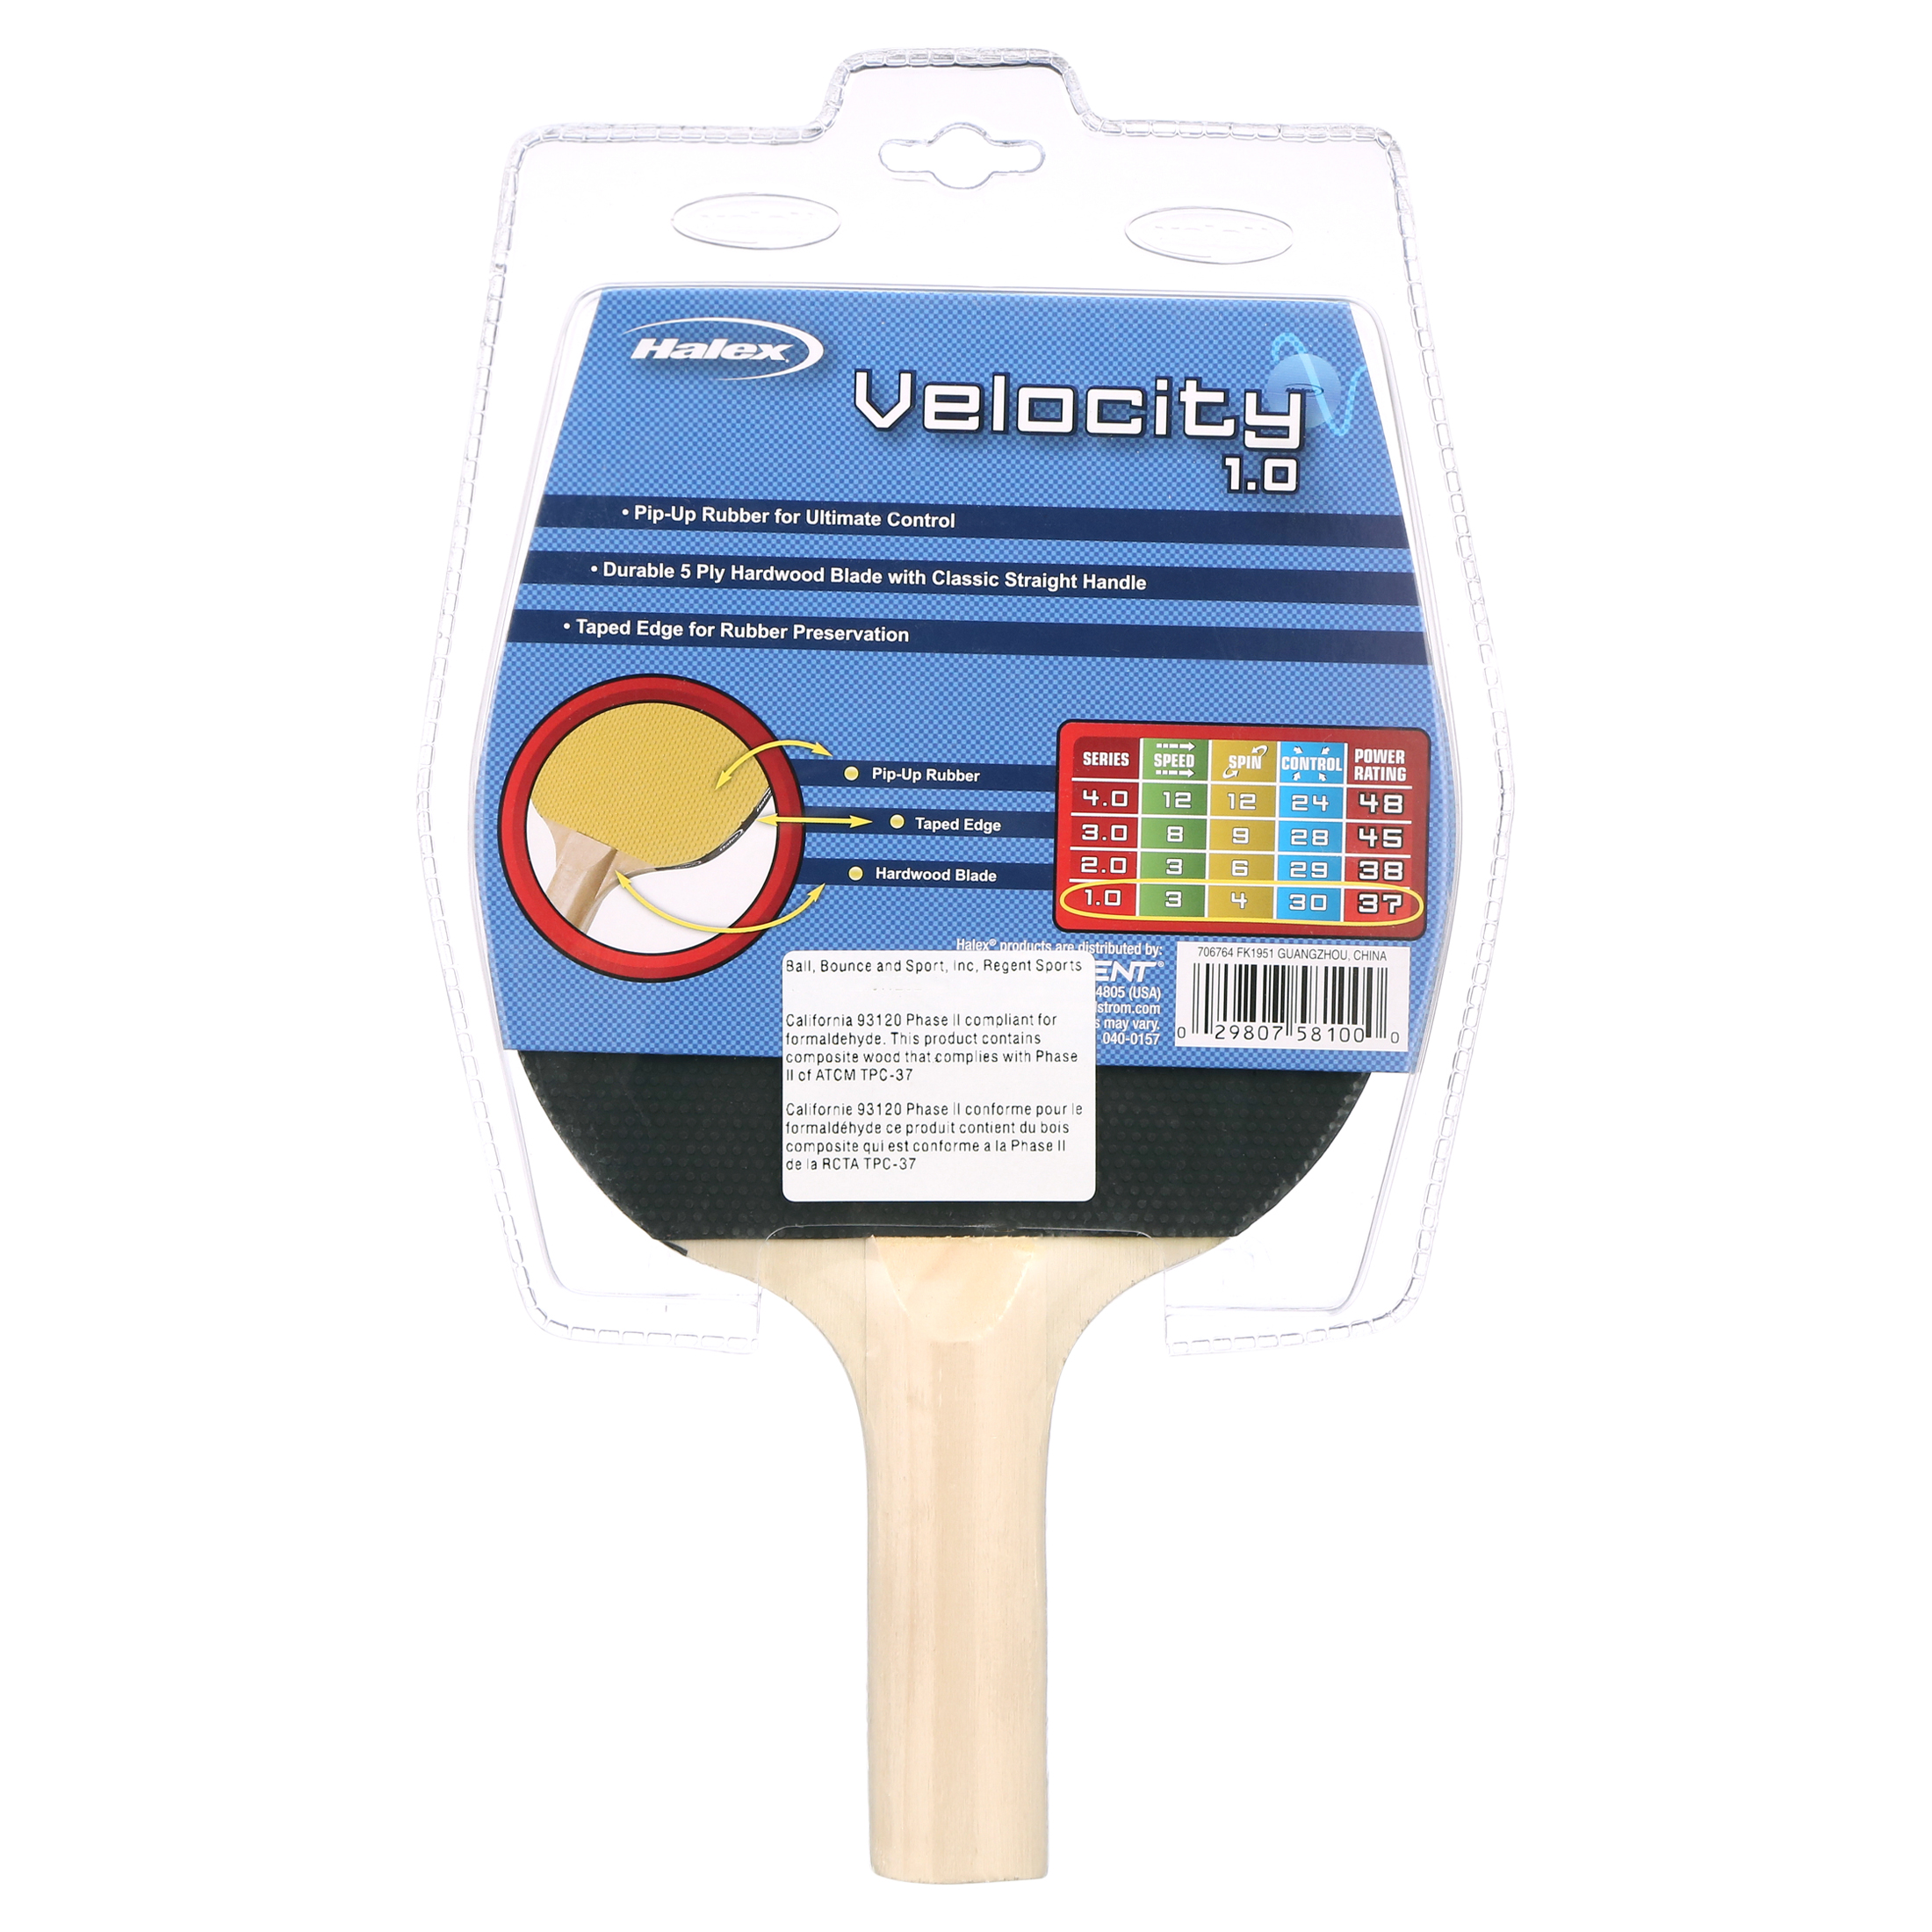 Halex Velocity Table Tennis Paddle, One Paddle, Wooden Handle - image 5 of 6